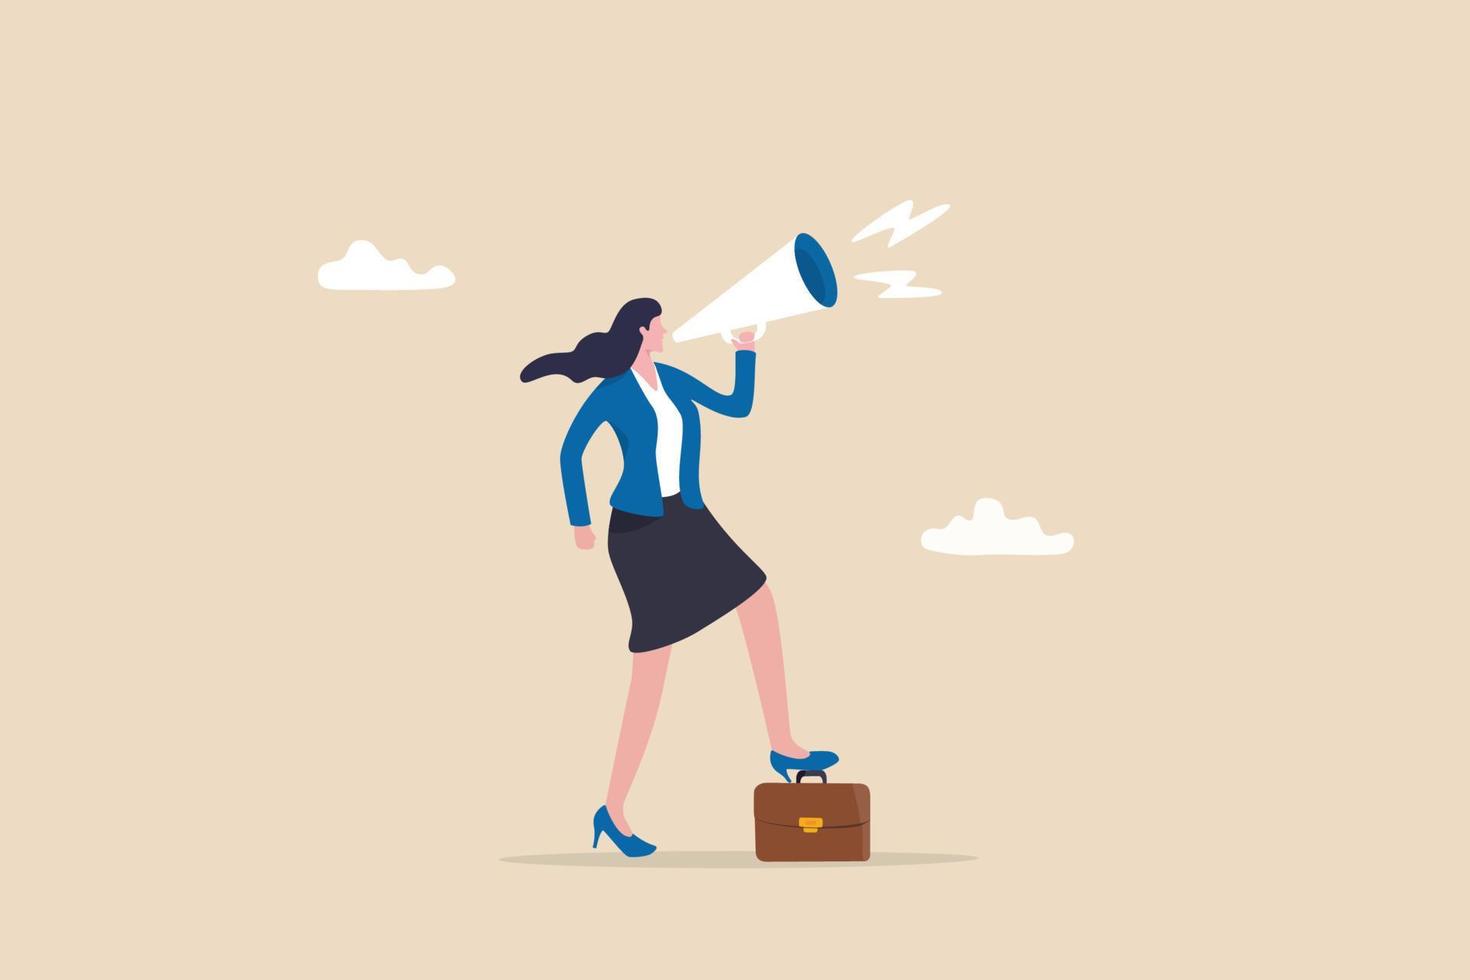 Speak up, communicate with confidence, telling the truth or presentation skill, storytelling, speaker, presentation or shout out concept, confidence businesswoman leader speak out loud on megaphone. vector